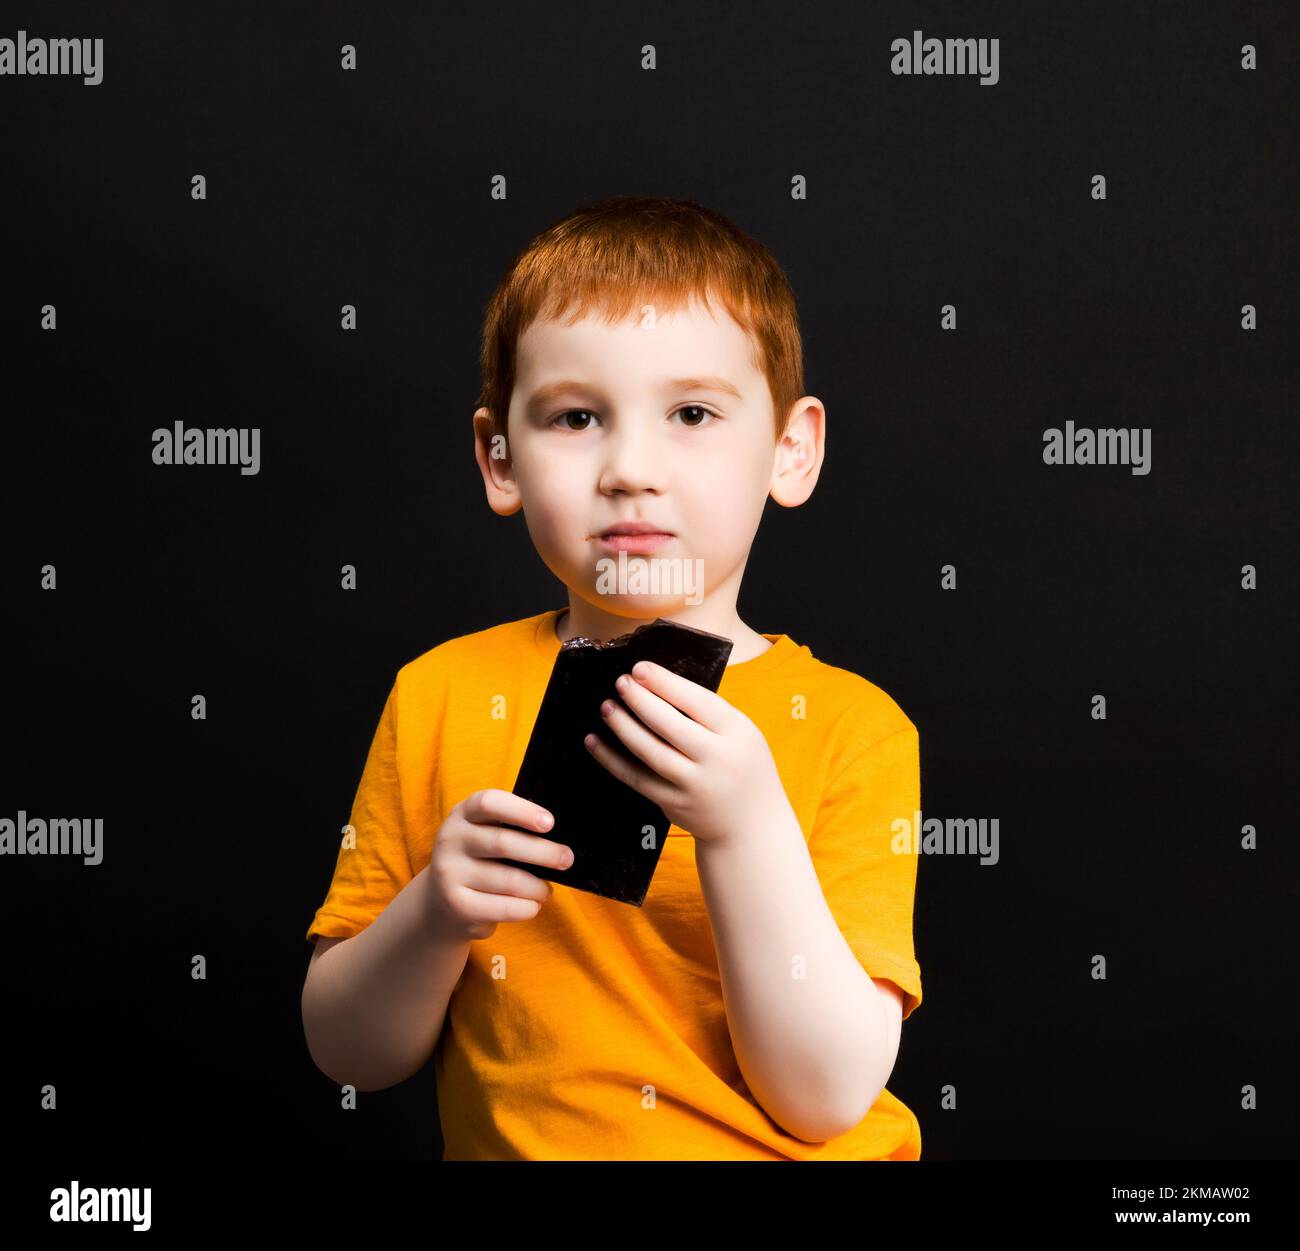 portrait the face of a small red-haired boy bites and bites a bar of sugar chocolate, close-up portrait of a child with sweets Stock Photo